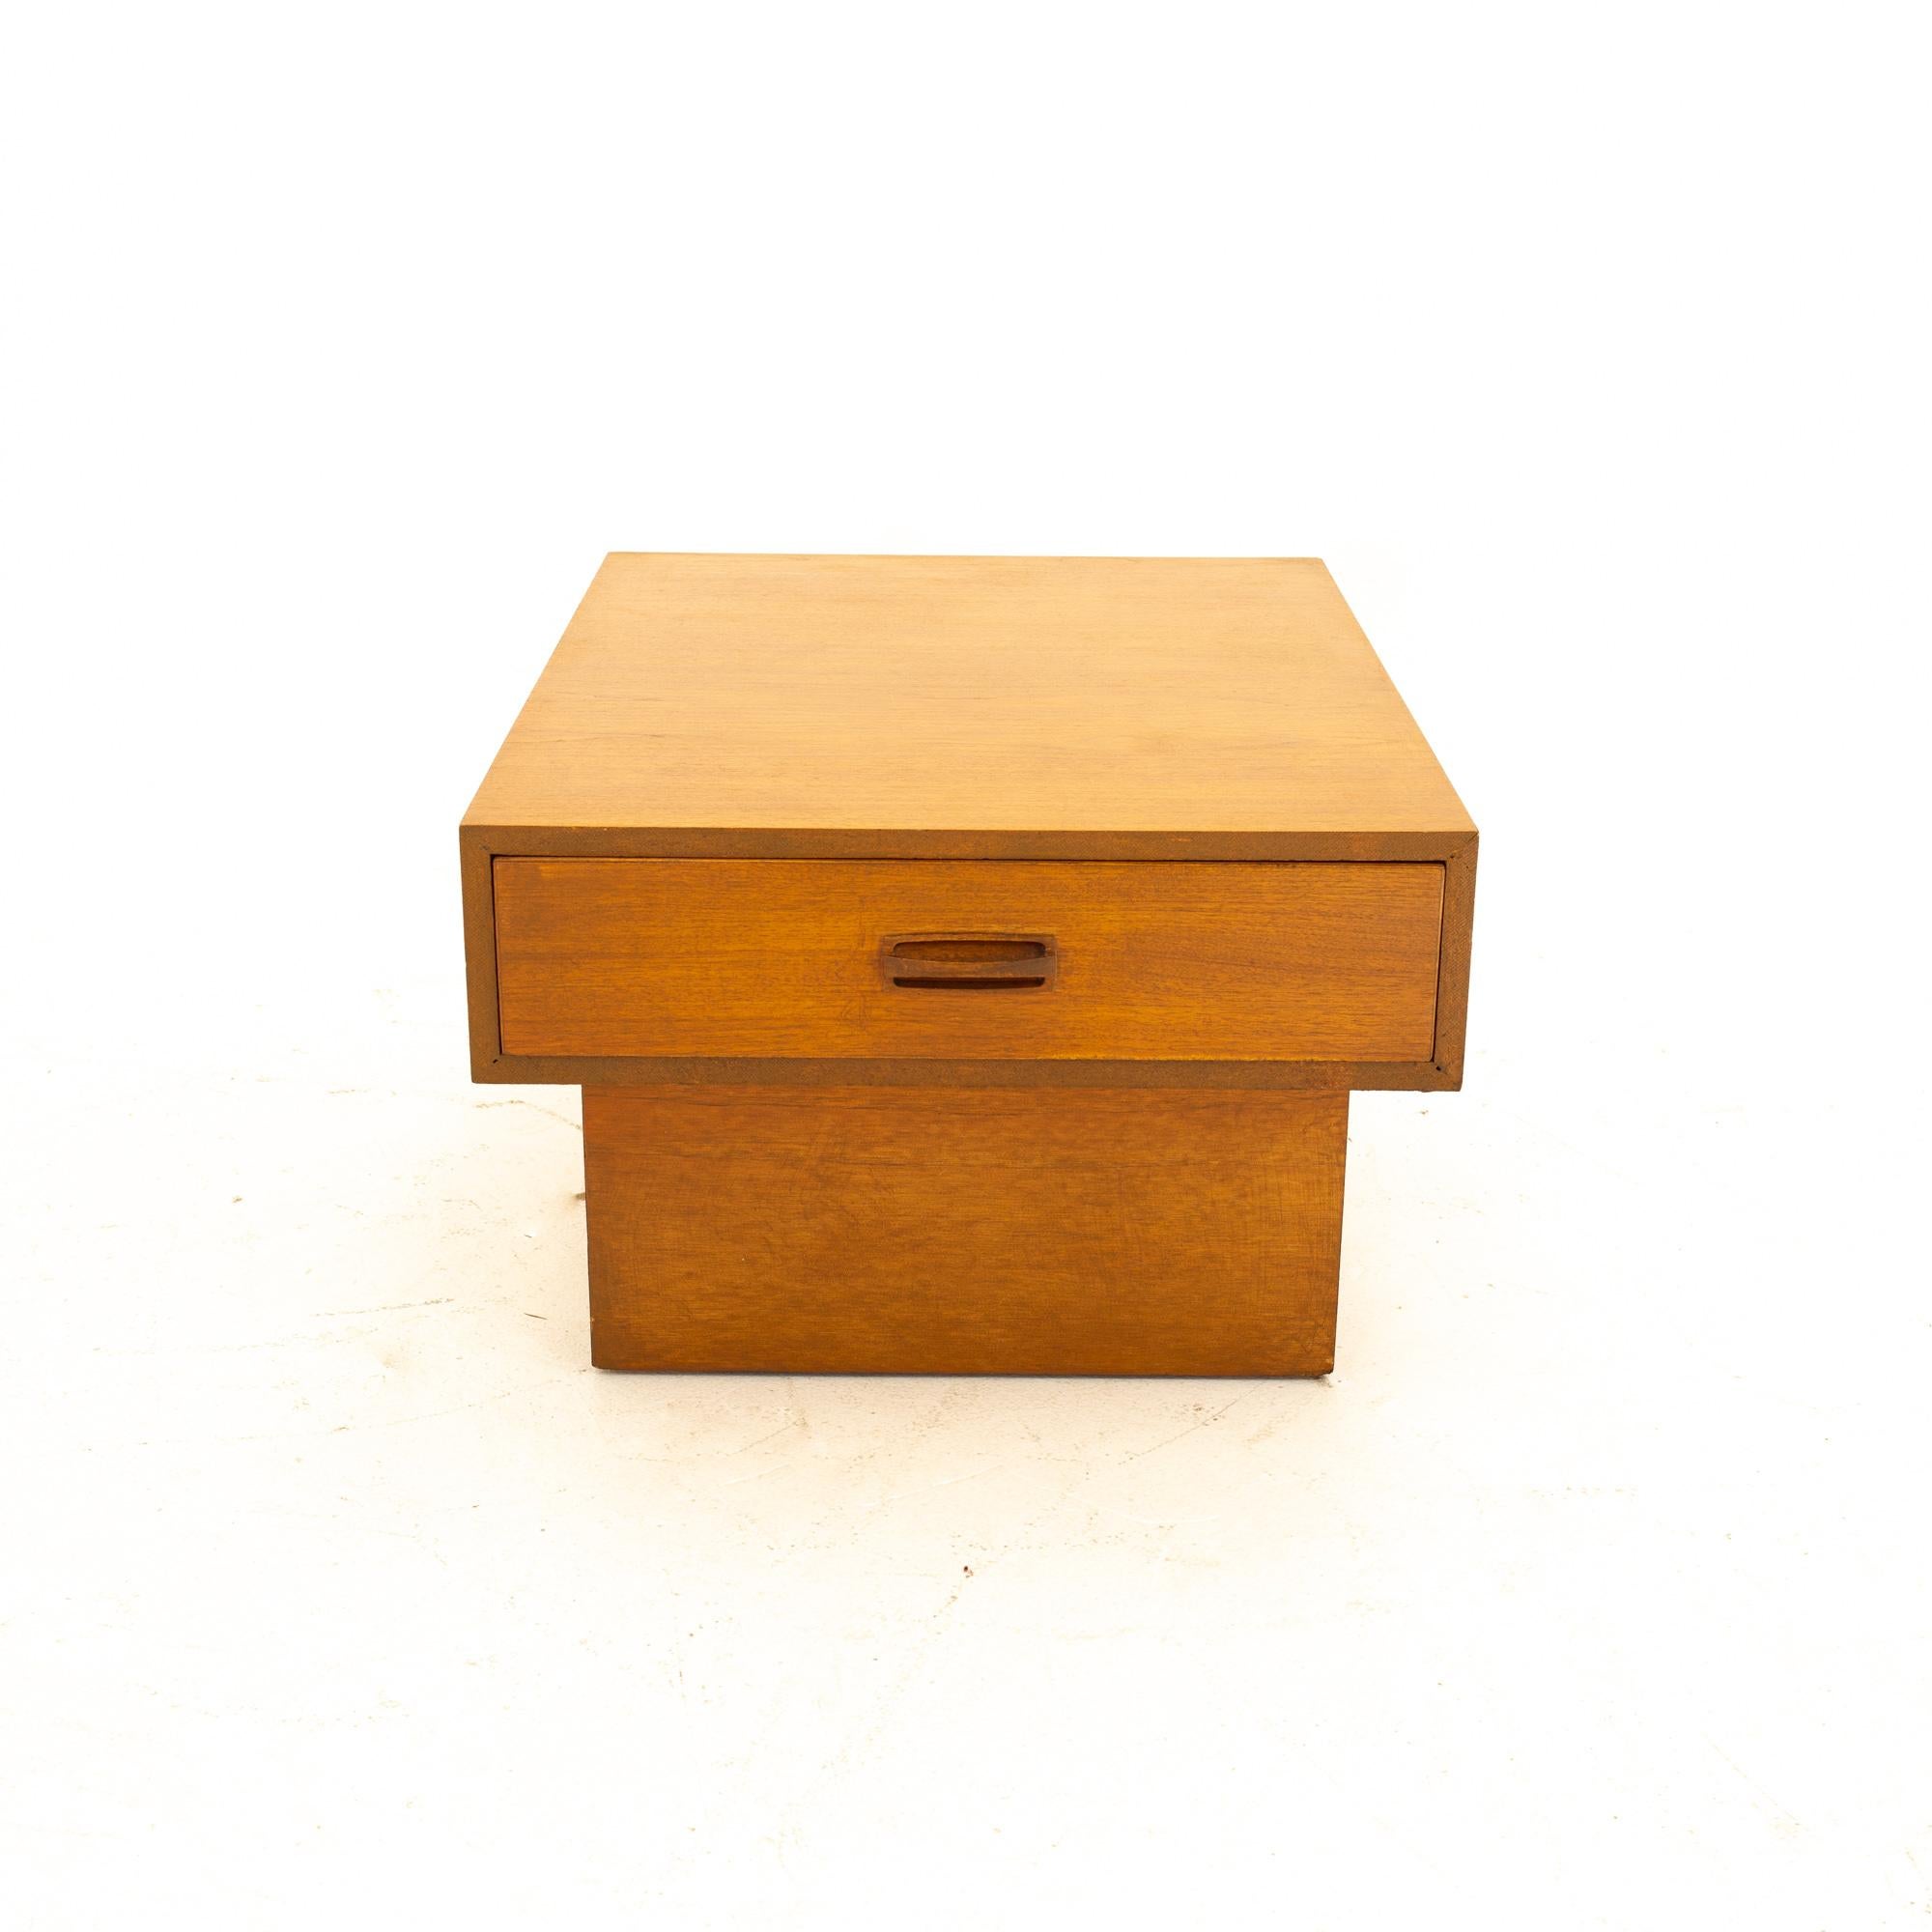 Danish style mid century teak and rosewood end table

End table measures: 22 wide x 29.5 deep x 15 high

?All pieces of furniture can be had in what we call restored vintage condition. That means the piece is restored upon purchase so it’s free